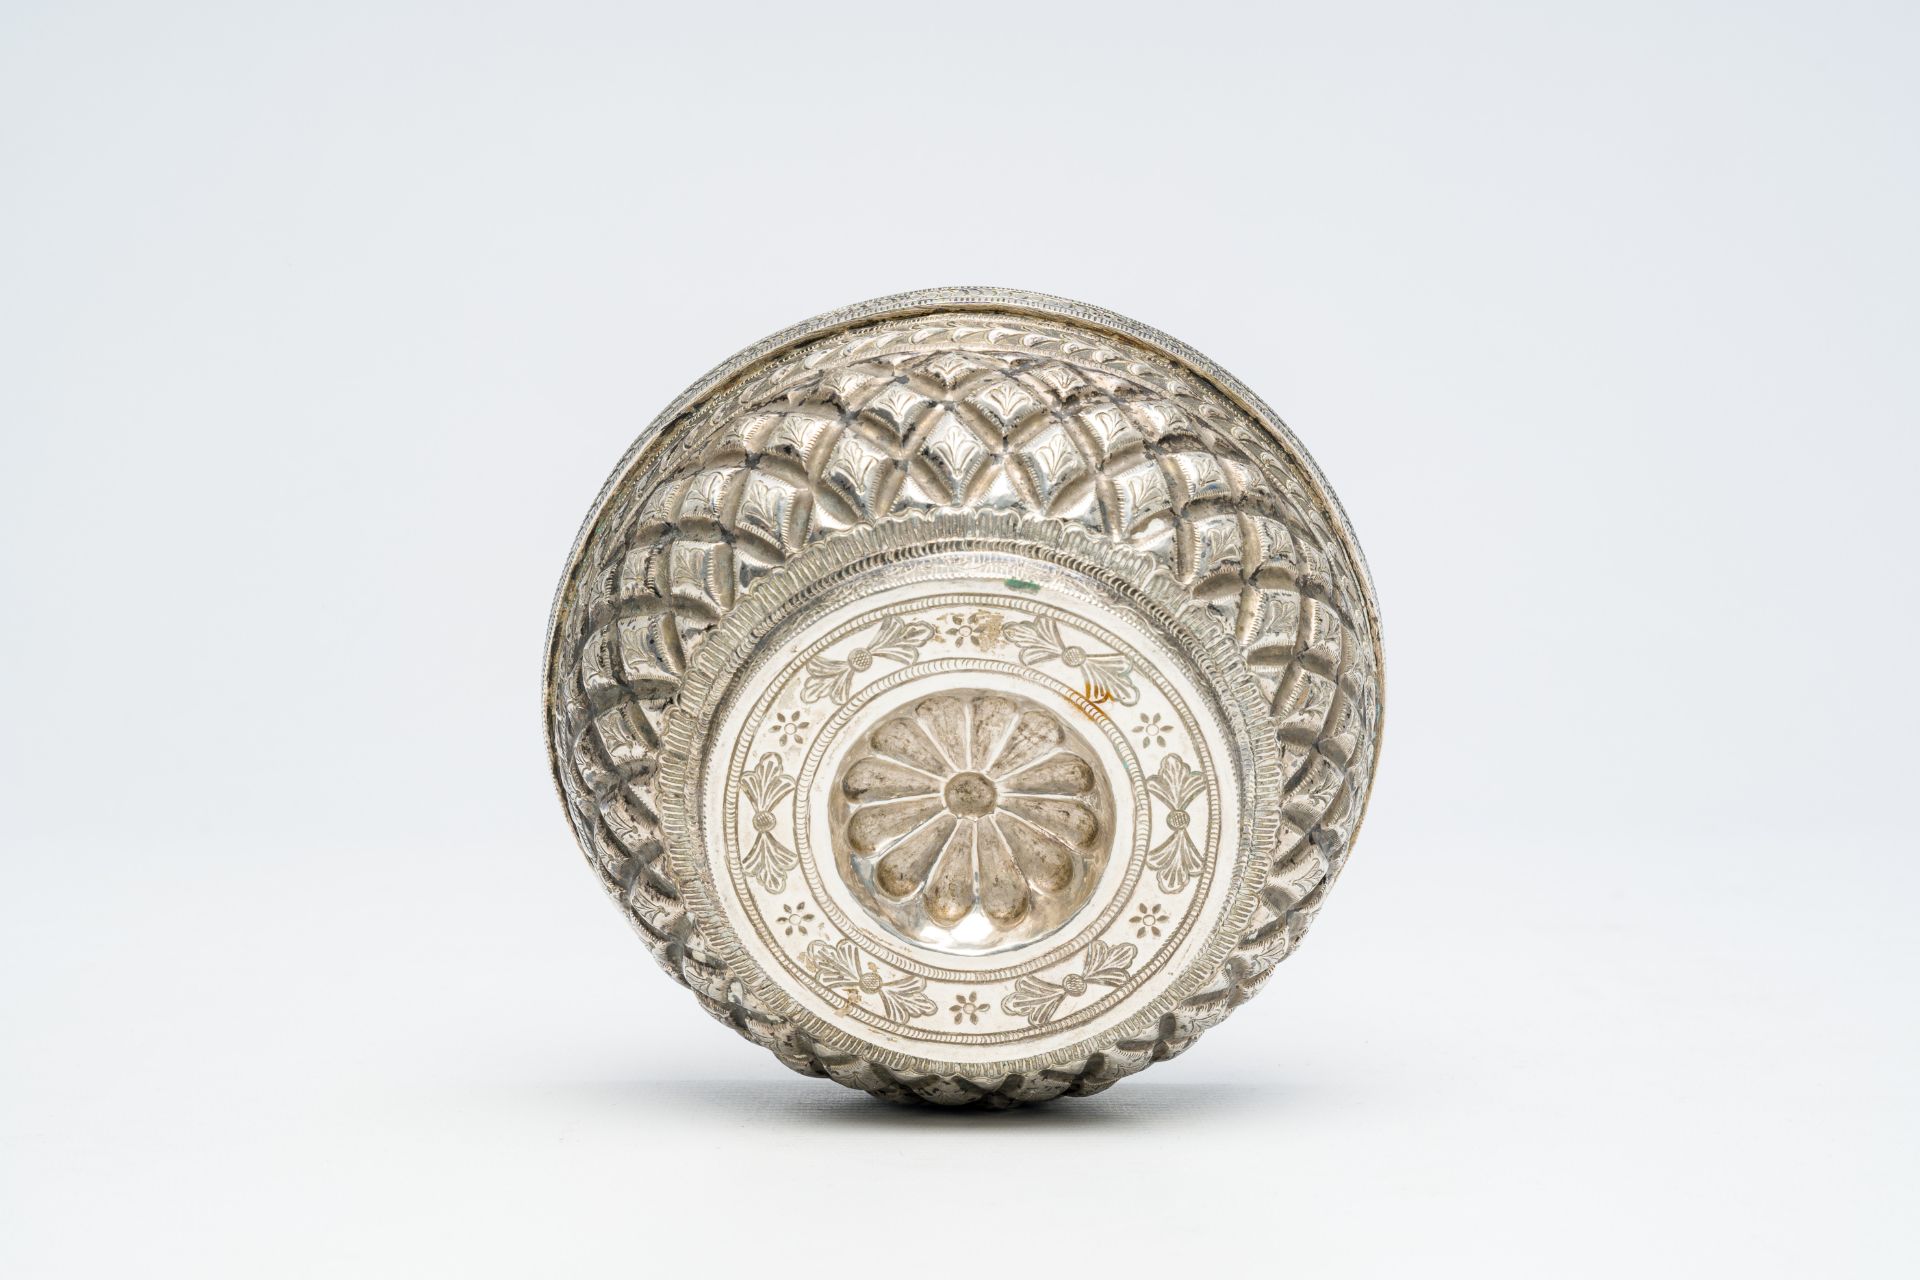 A Southeast Asian silver bowl, probably Laos or Sri Lanka, 19th/20th C. - Image 7 of 7